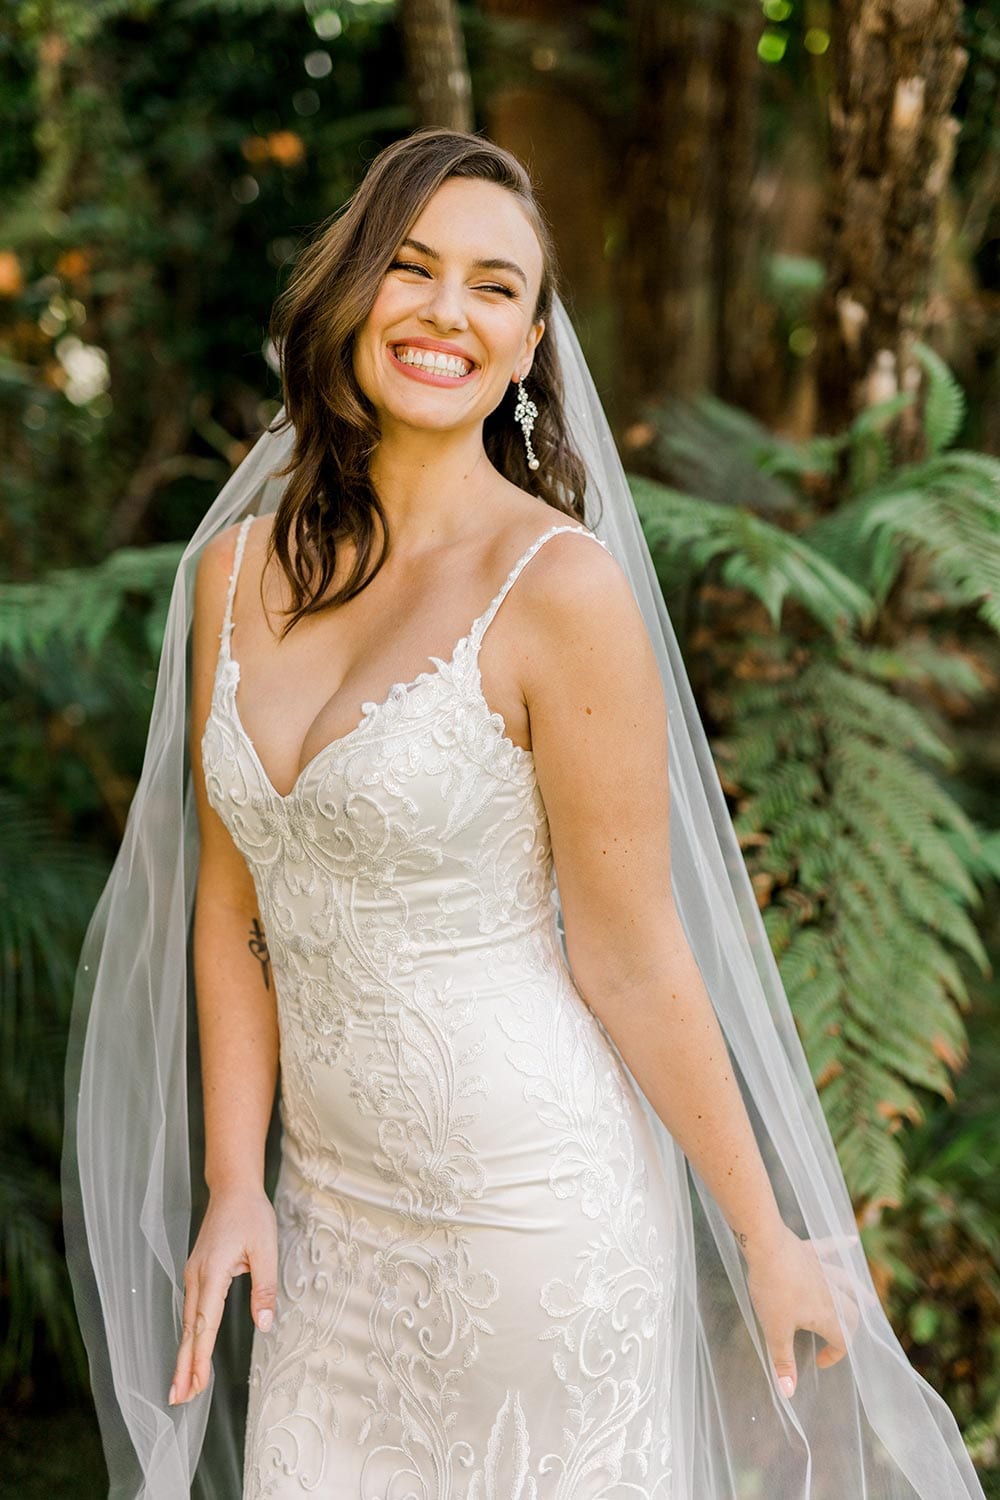 Sahara Wedding Dress from Vinka Design. Stunning fitted lace wedding gown. Lightly-beaded floral lace highlights the ivory stretch satin base. Sweetheart neckline & low back with beautiful lace detail. Front of dress. Photographed in landscaped gardens.